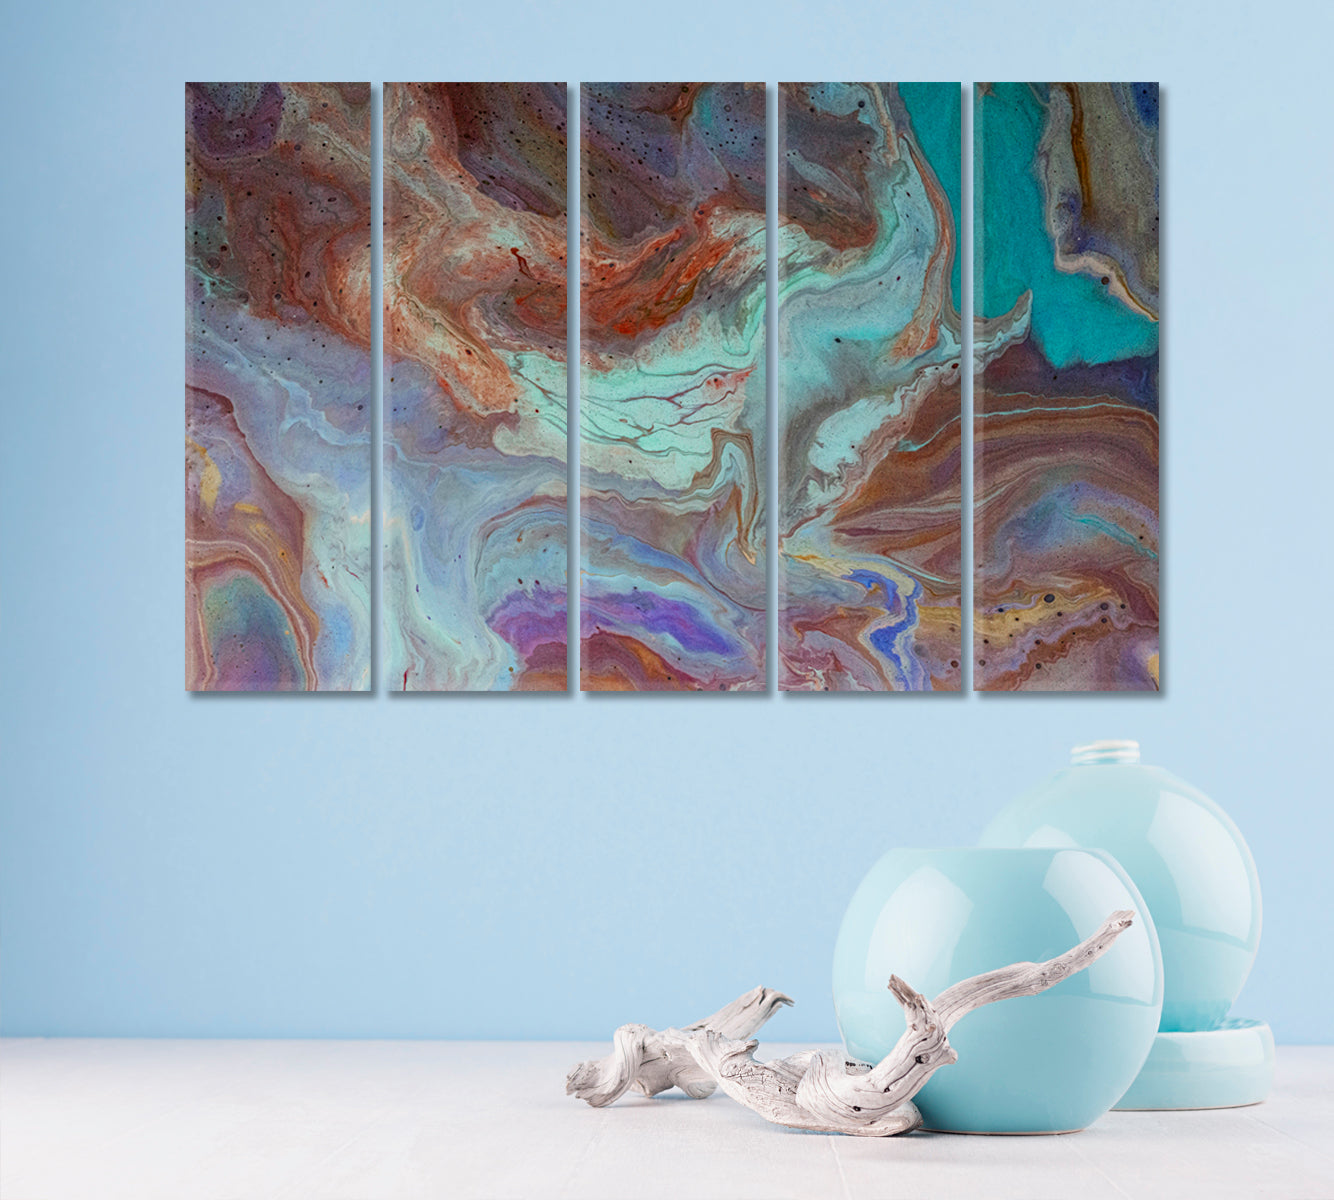 Abstract Fluid Colorful Mix of Vibrant Marble Swirls Canvas Print-Canvas Print-CetArt-5 Panels-36x24 inches-CetArt